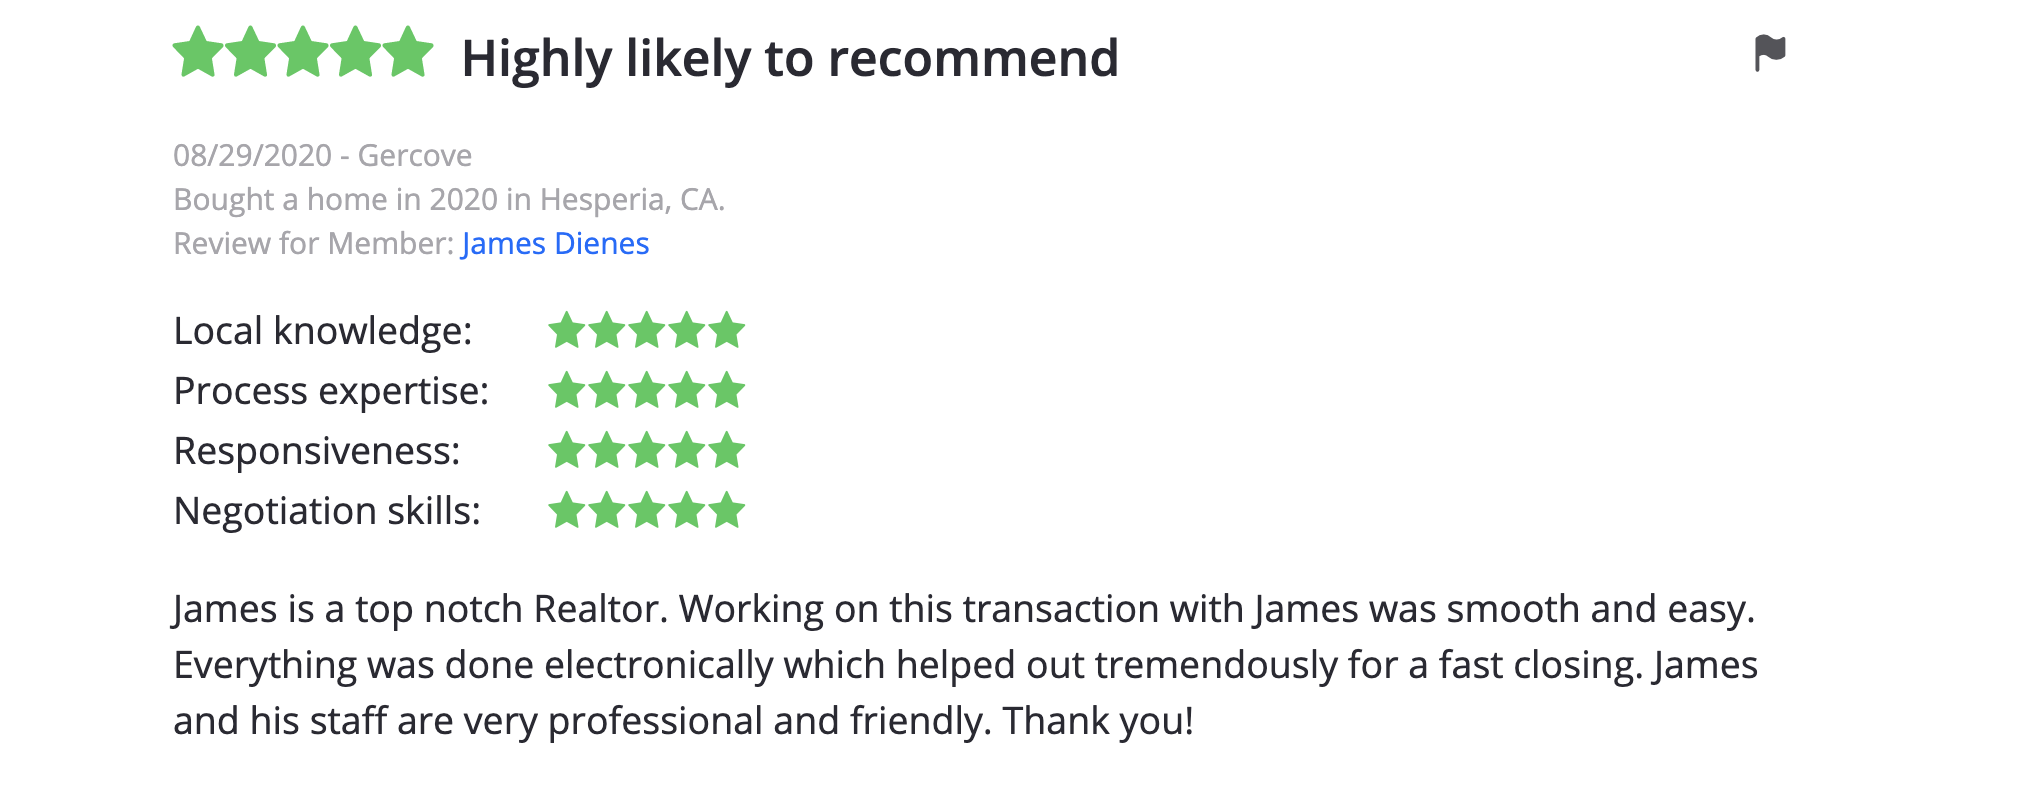 James is a top notch Realtor. Working on this transaction with James was smooth and easy. Everything was done electronically which helped out tremendously for
a fast closing. James and his staff are very professional and friendly. Thank you!